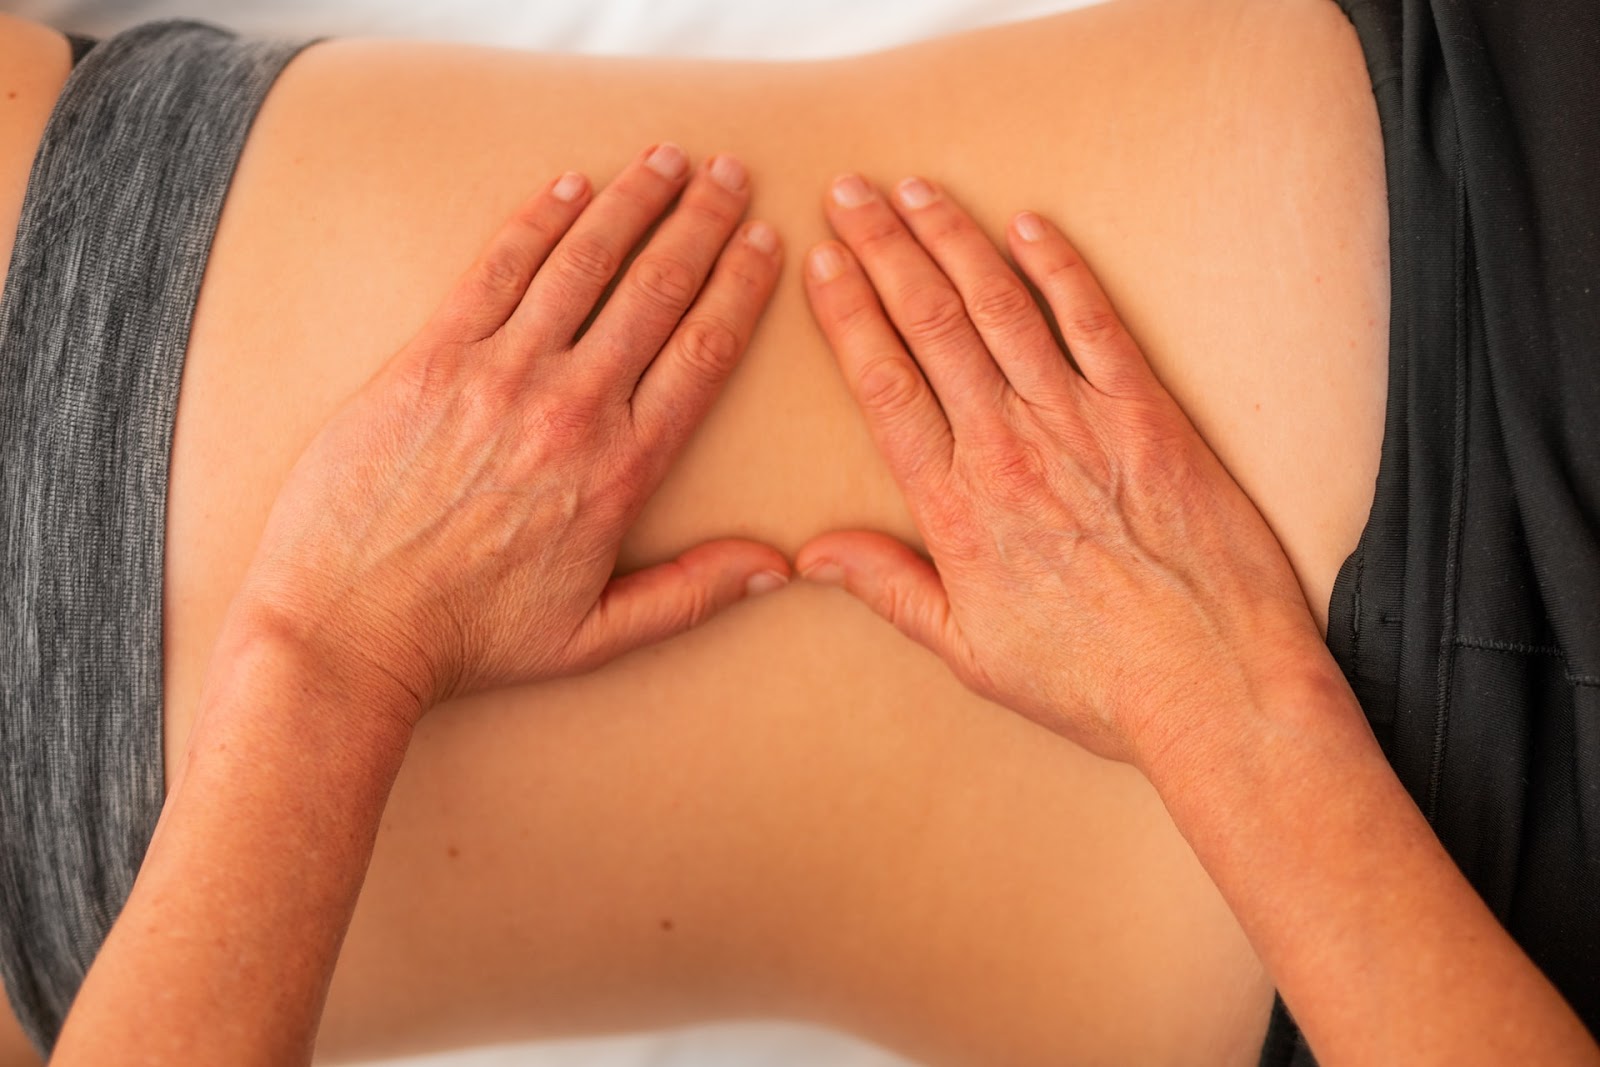 Back pain treatment after a car accident in New York City